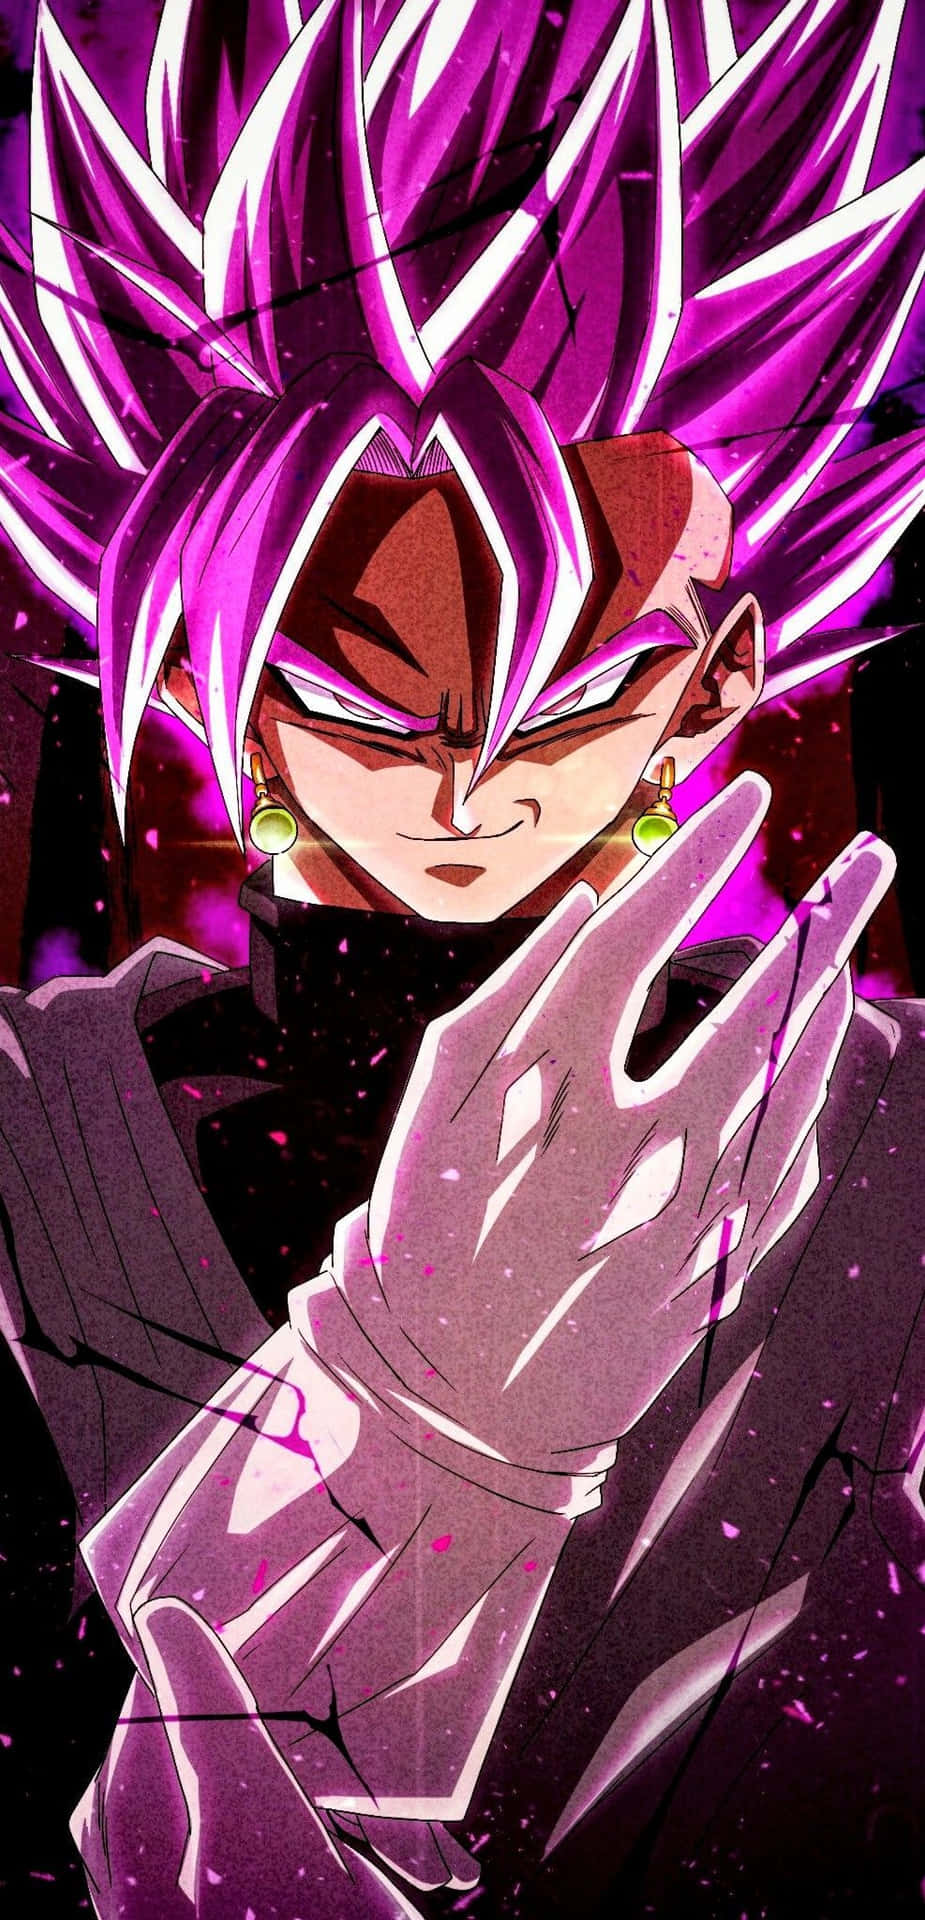 Goku Black in a battle for justice